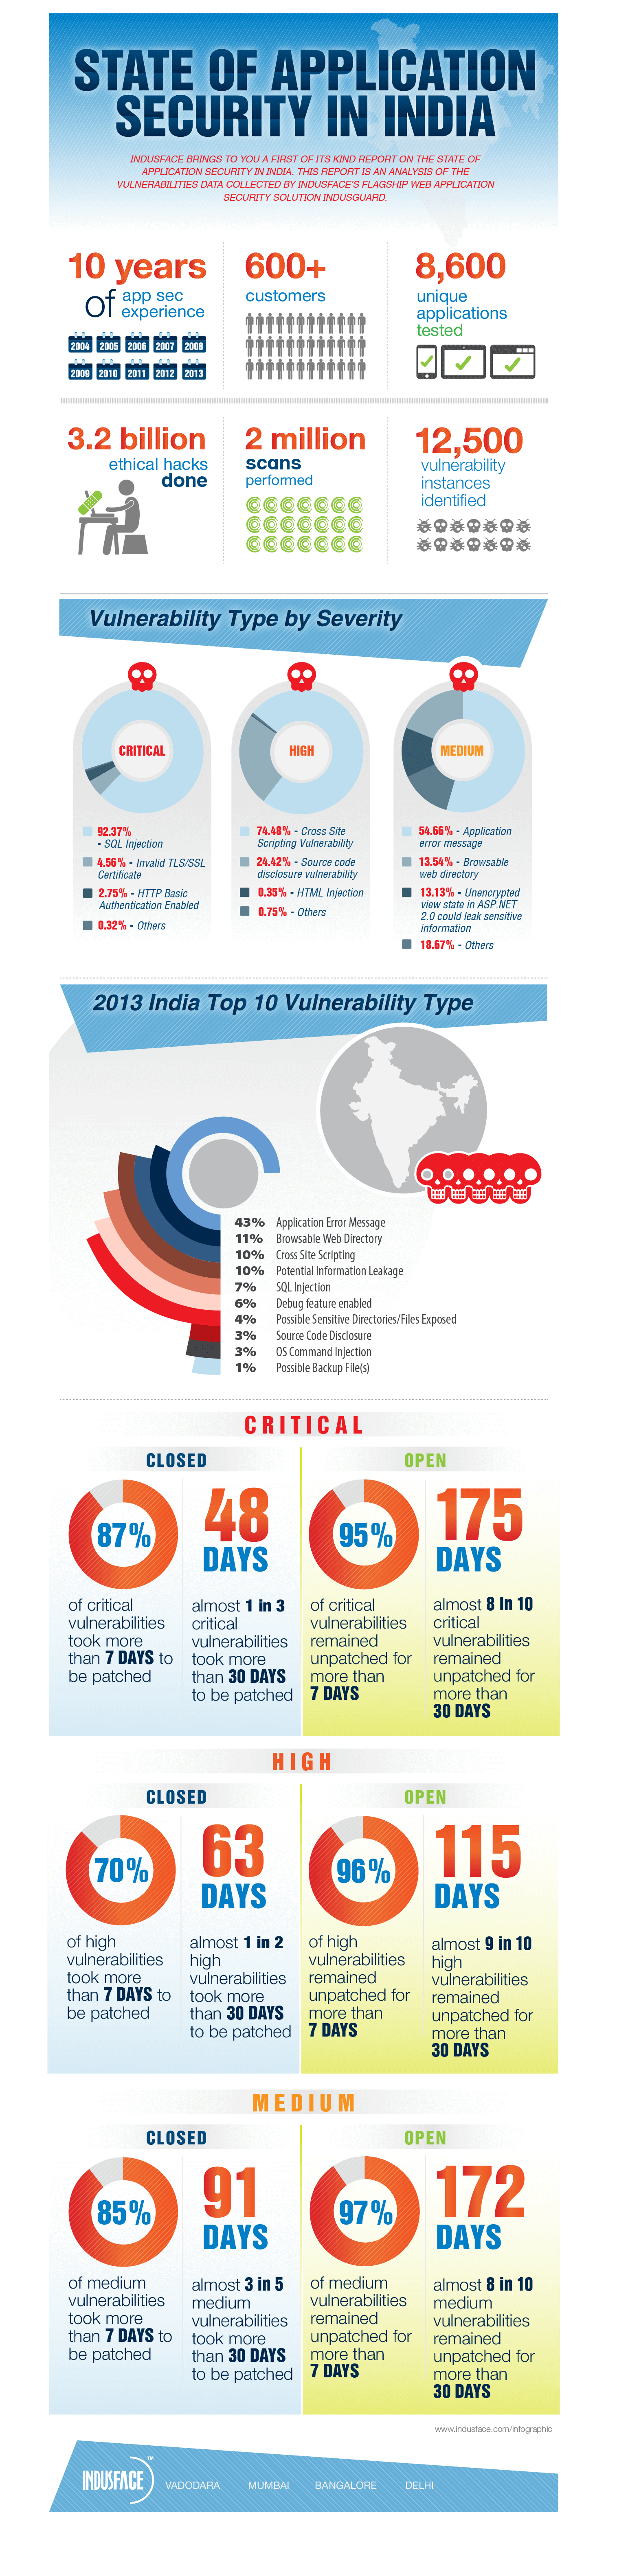 State of Application Security in India - Infographic